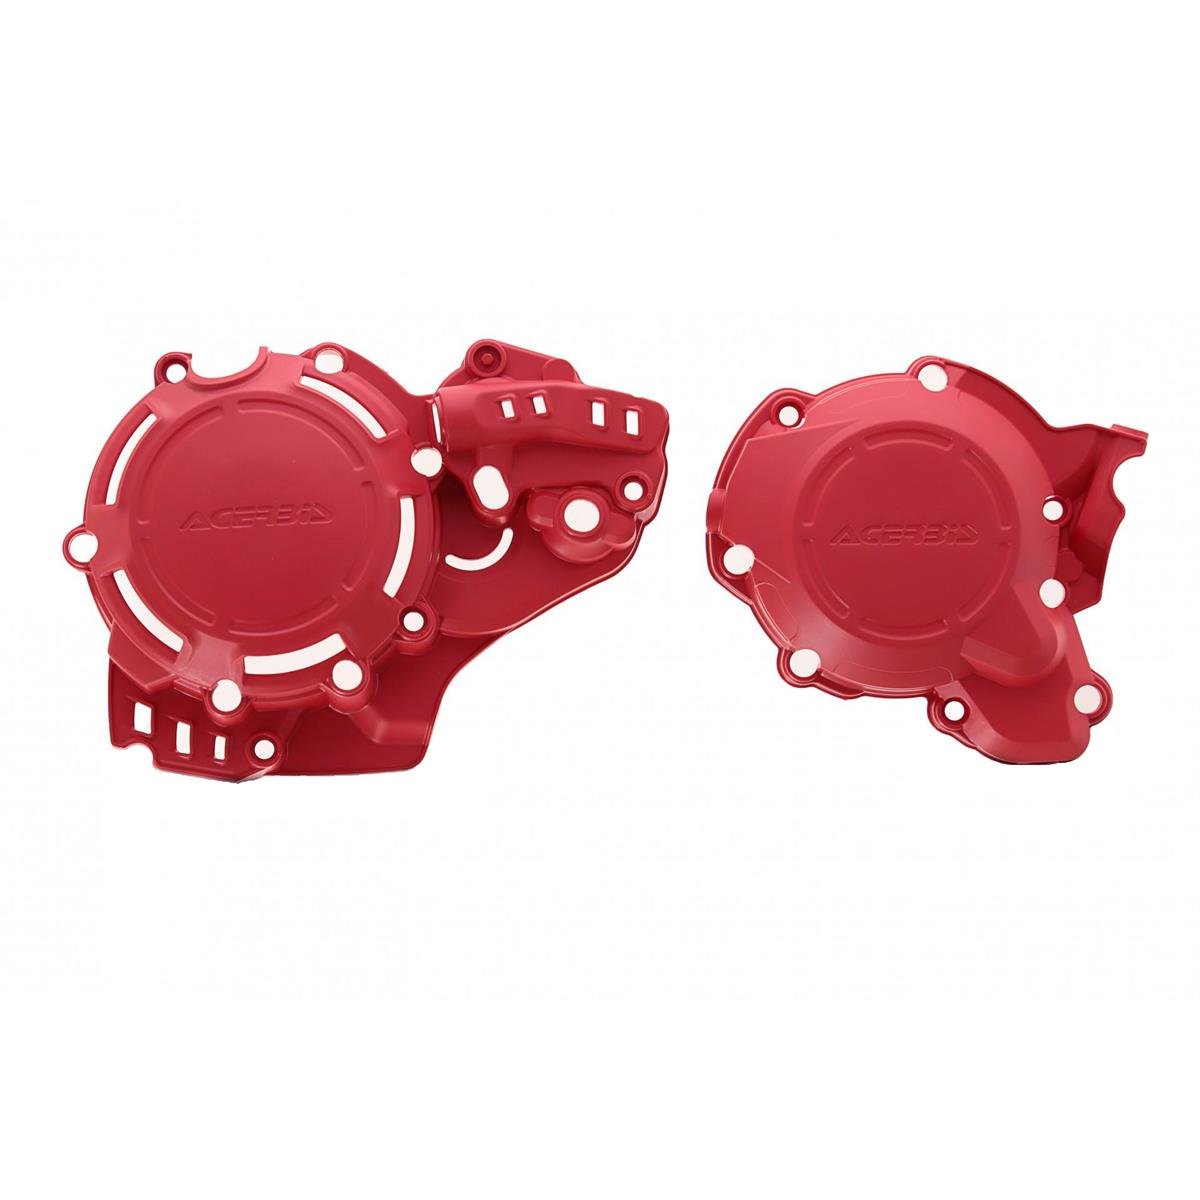 Acerbis Clutch/Ignition Cover Protection X-Power Gas Gas EC 250/300 21-, Red